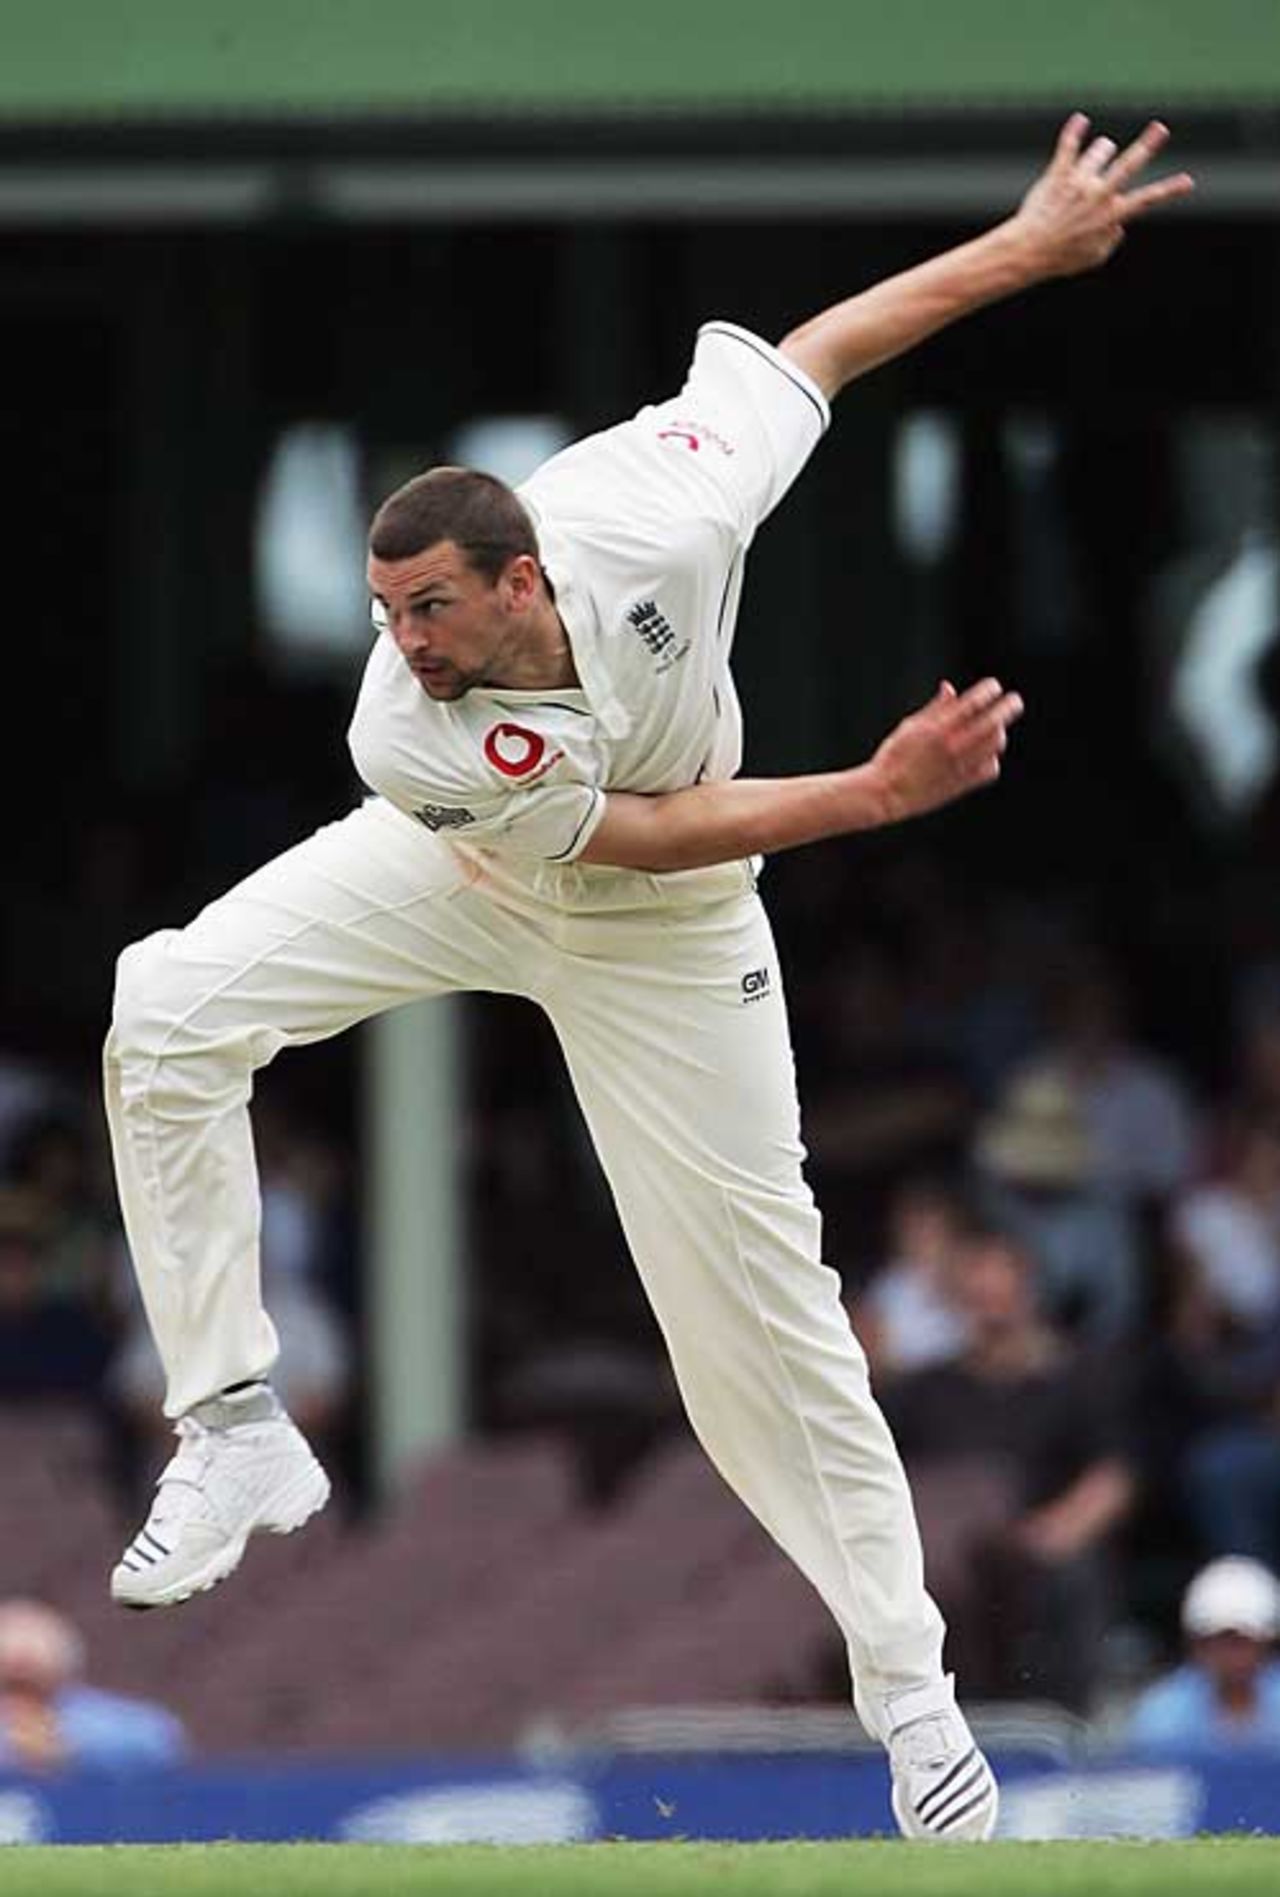 Steve Harmison charges in but managed just a single wicket, New South Wales v England XI, SCG, November 12, 2006